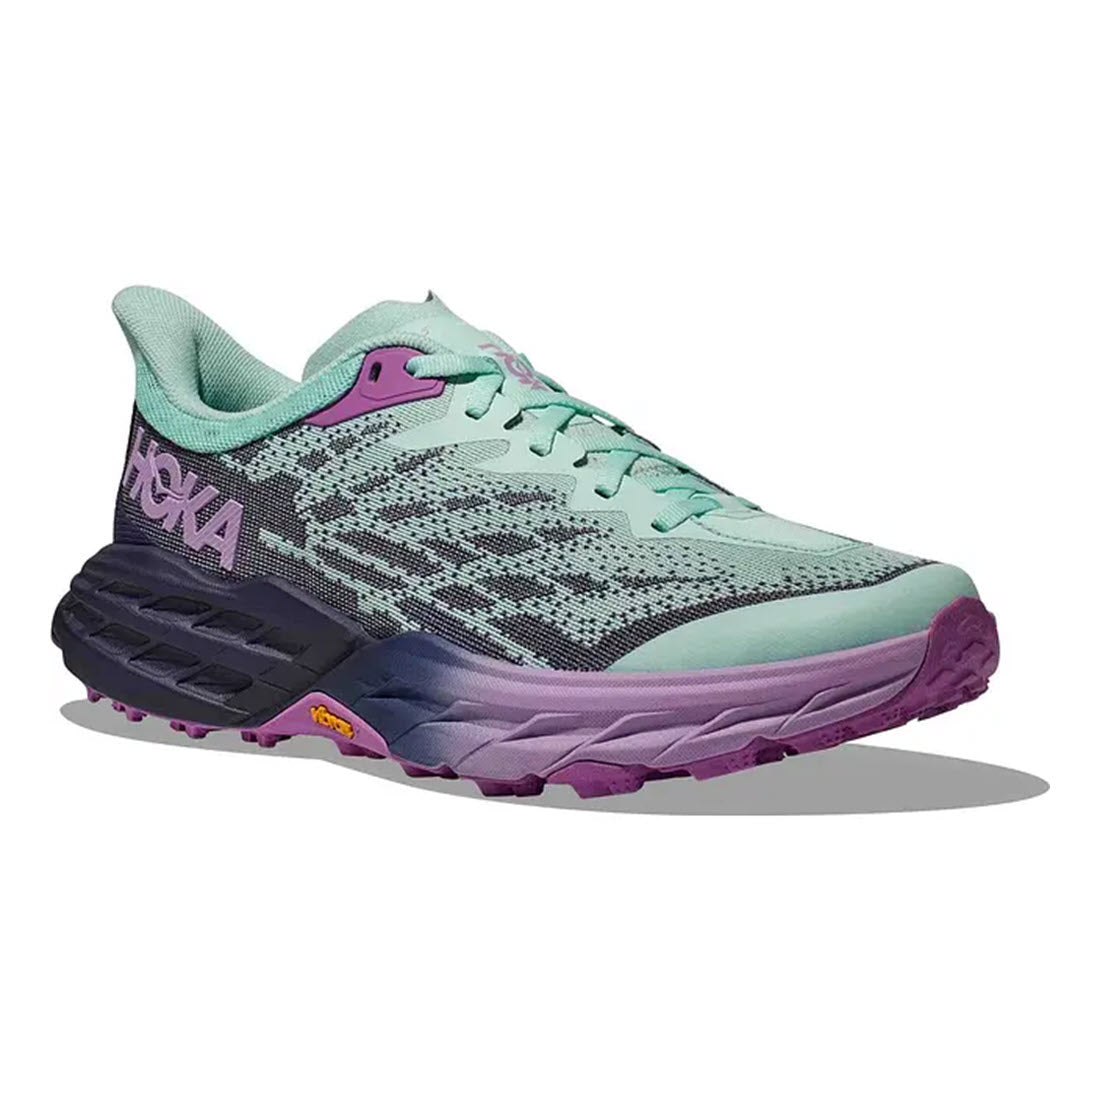 A HOKA Speedgoat 5 Sunlit Ocean/Night Sky running shoe by Hoka with a mint green and purple color scheme, featuring a cushioned sole and breathable mesh upper.